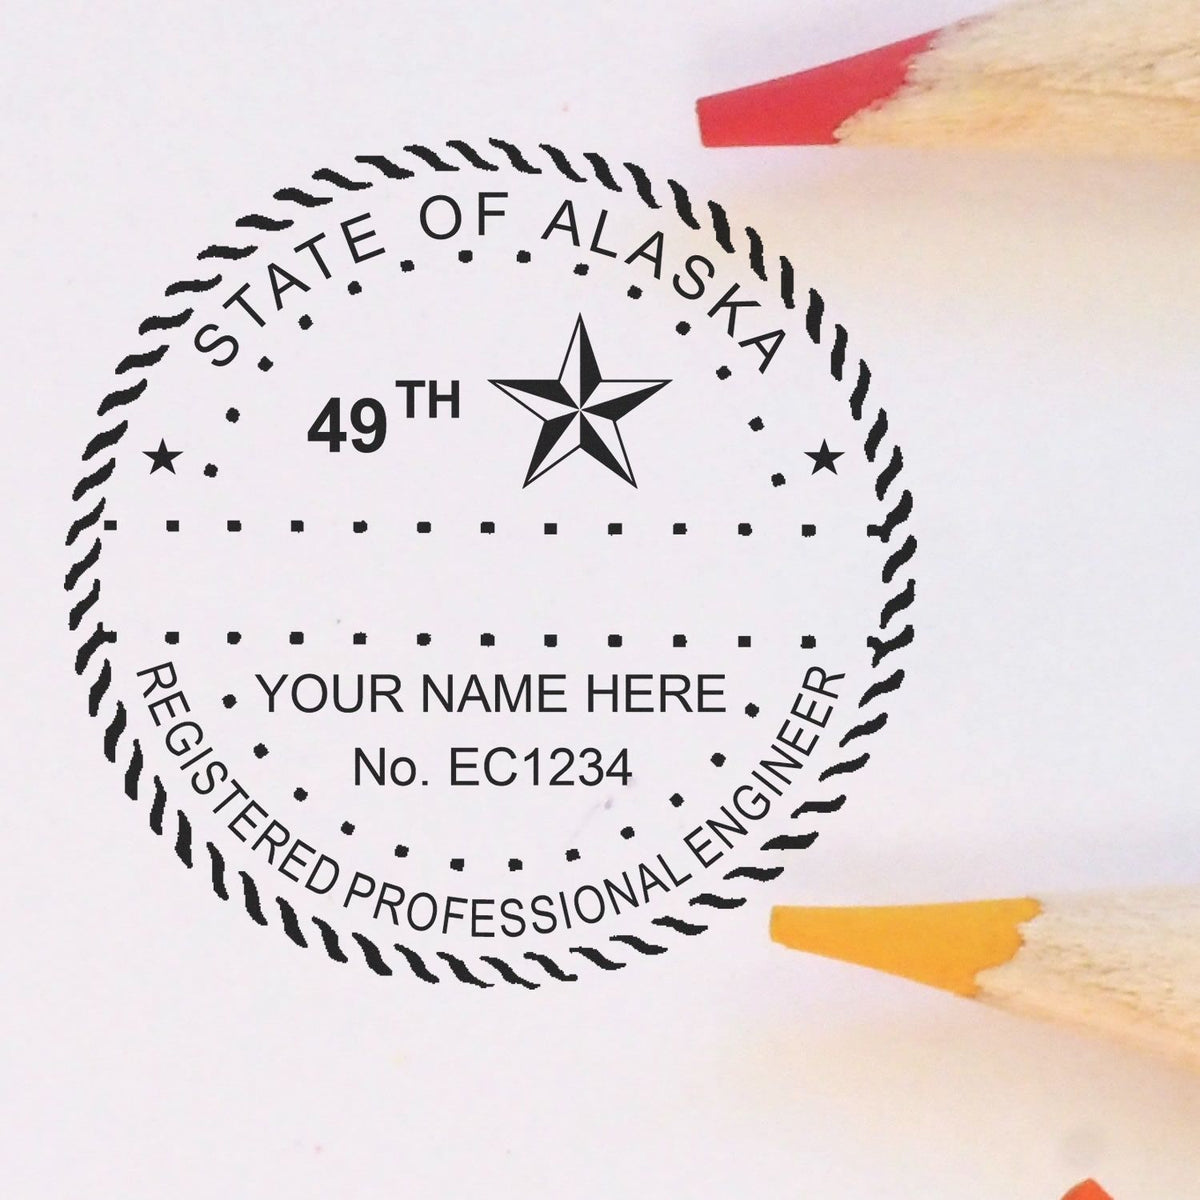 This paper is stamped with a sample imprint of the Alaska Professional Engineer Seal Stamp, signifying its quality and reliability.